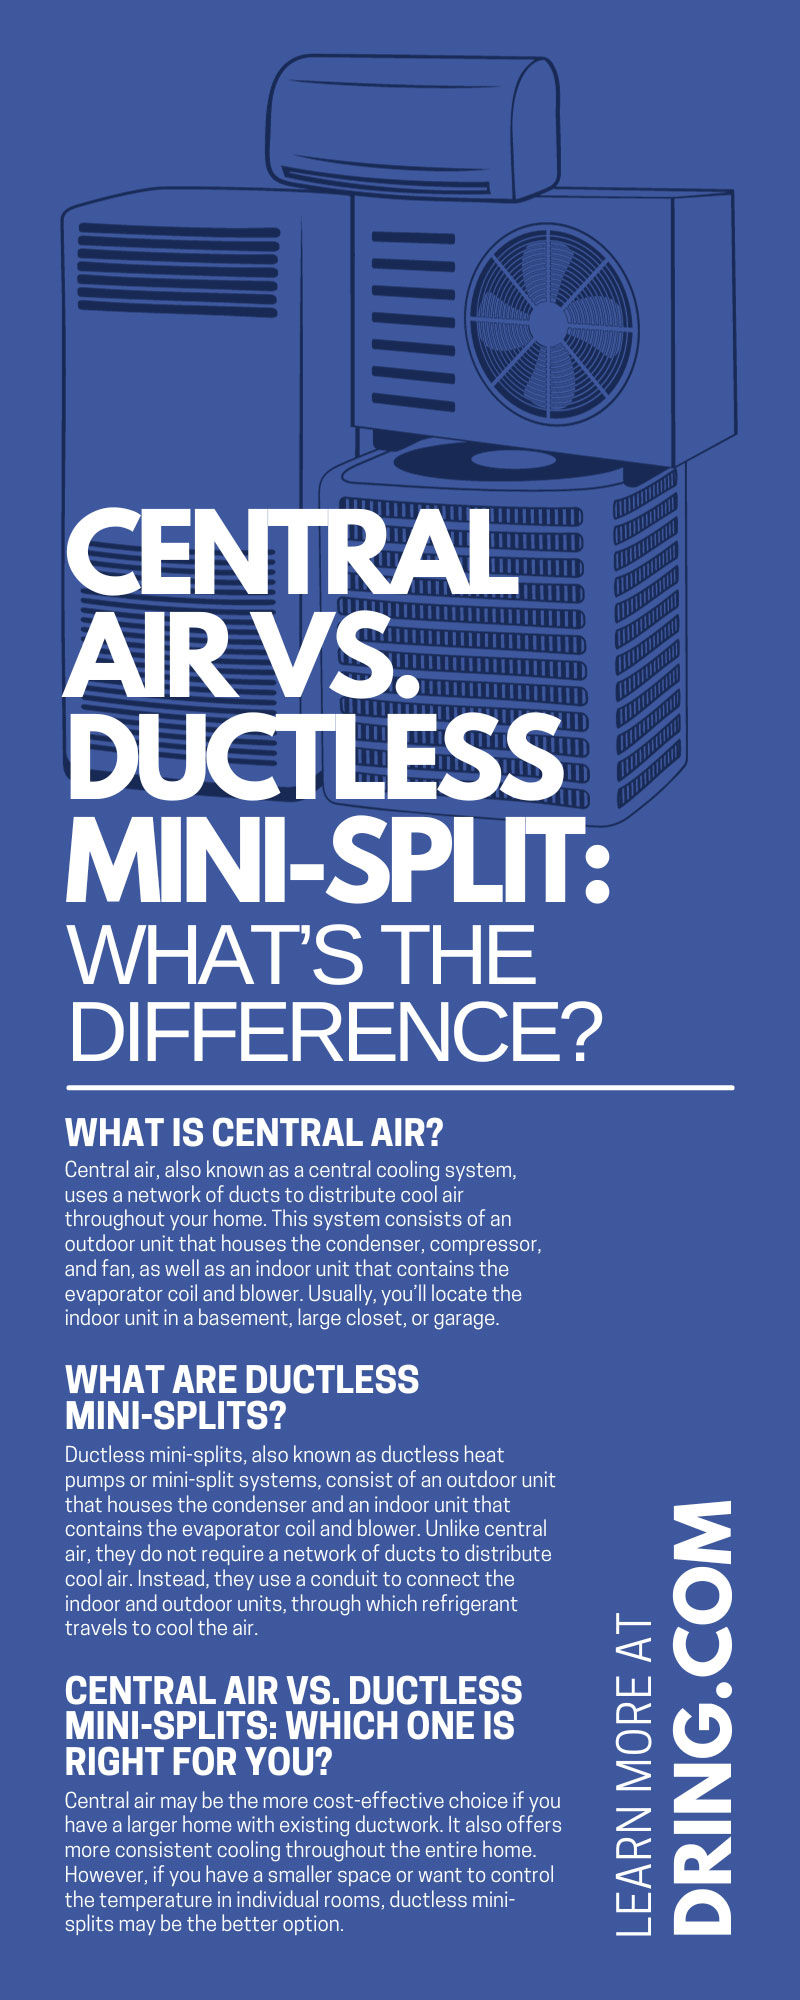 Central Air vs. Ductless Mini-Split: What’s the Difference?